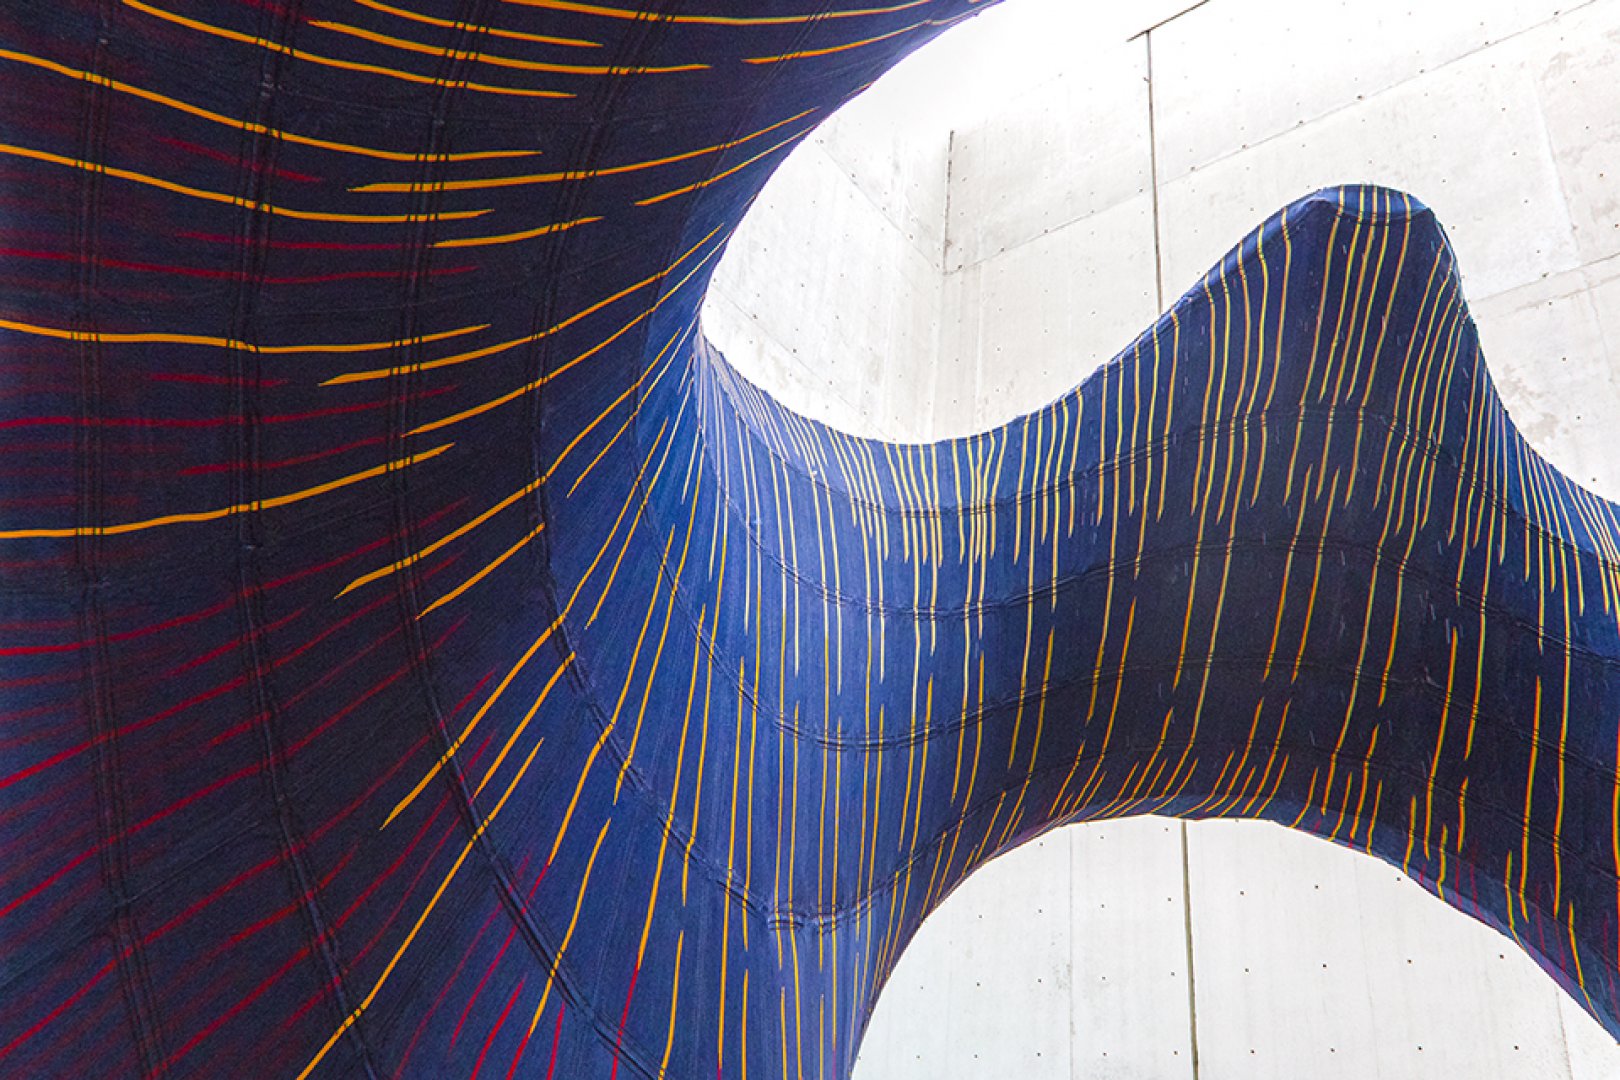 The colorful, textile-based underside of KnitCandela, the new experimental pavilion from Zaha Hadid Achitects and ETH Zurich.